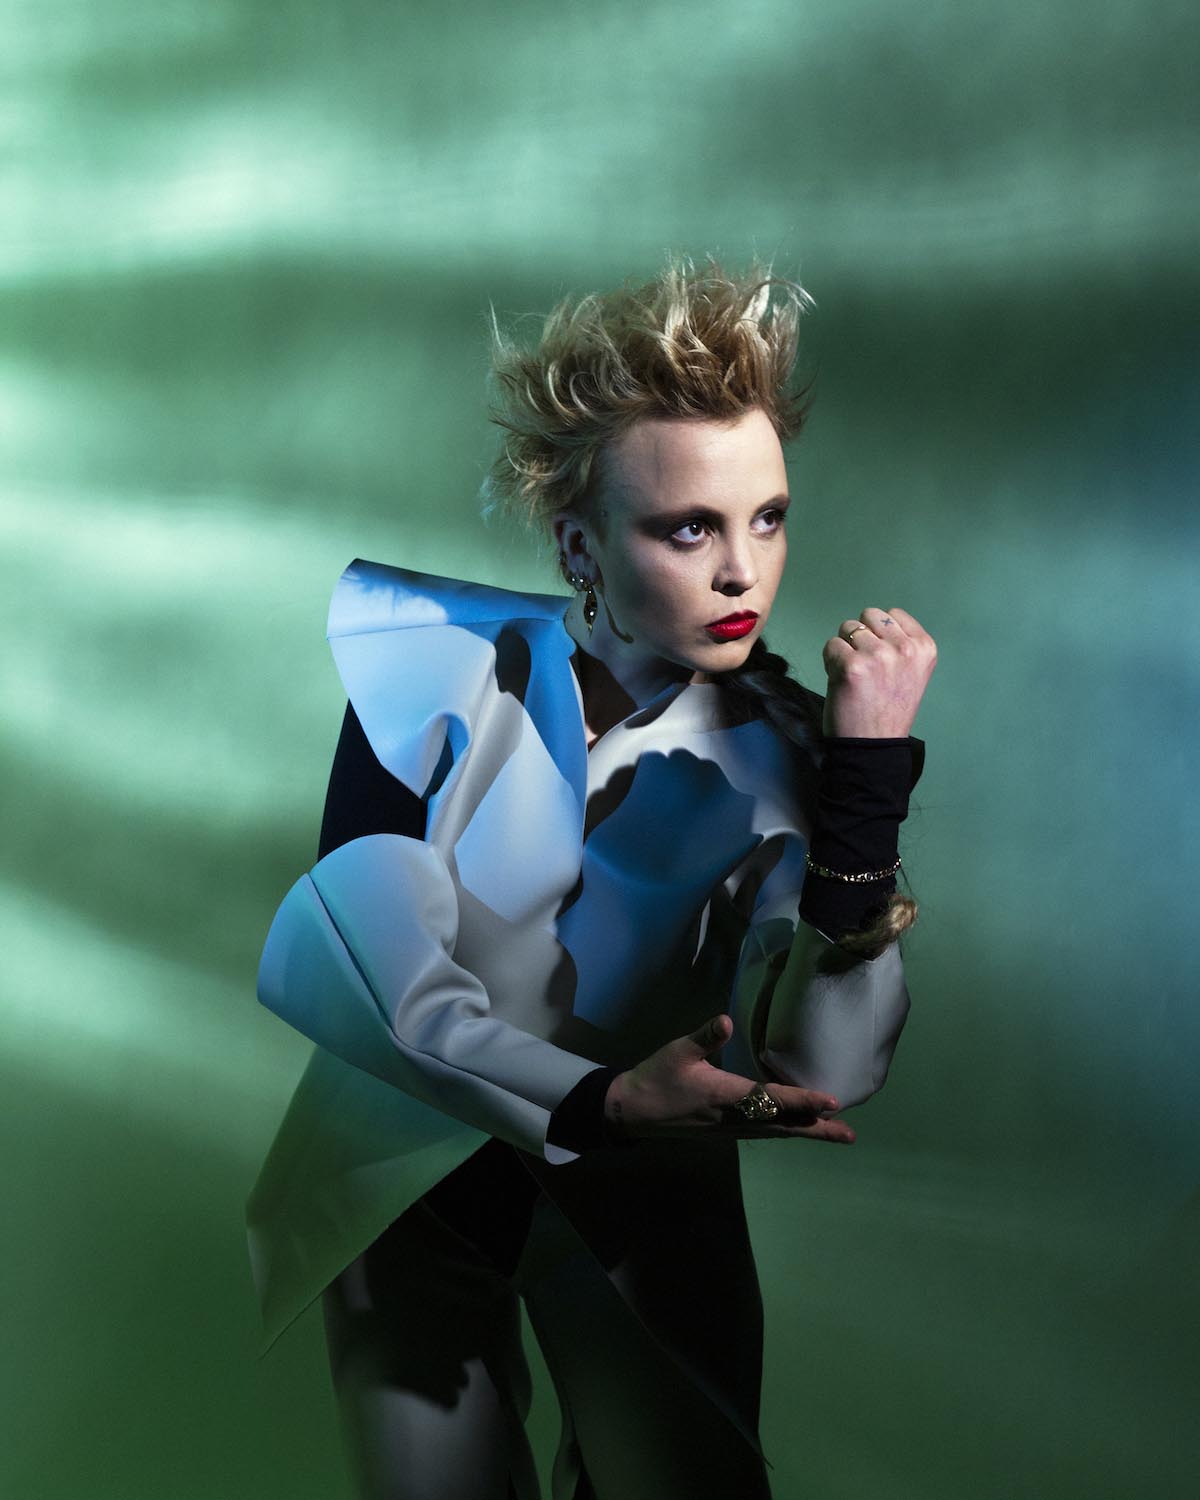 Young white woman with short blond hair styled upwards, dark eye make-up and red lips looks combatively out of the picture to the right. L Twills has her left hand clenched into a fist and holds her arm bent upwards, supporting her elbow with the other hand. She is wearing an unusual jacket with a black base and white wide set shoulders and white trumpet-shaped sleeve patches on the forearm. The background shimmers greenish with shadows that also fall on L Twills.